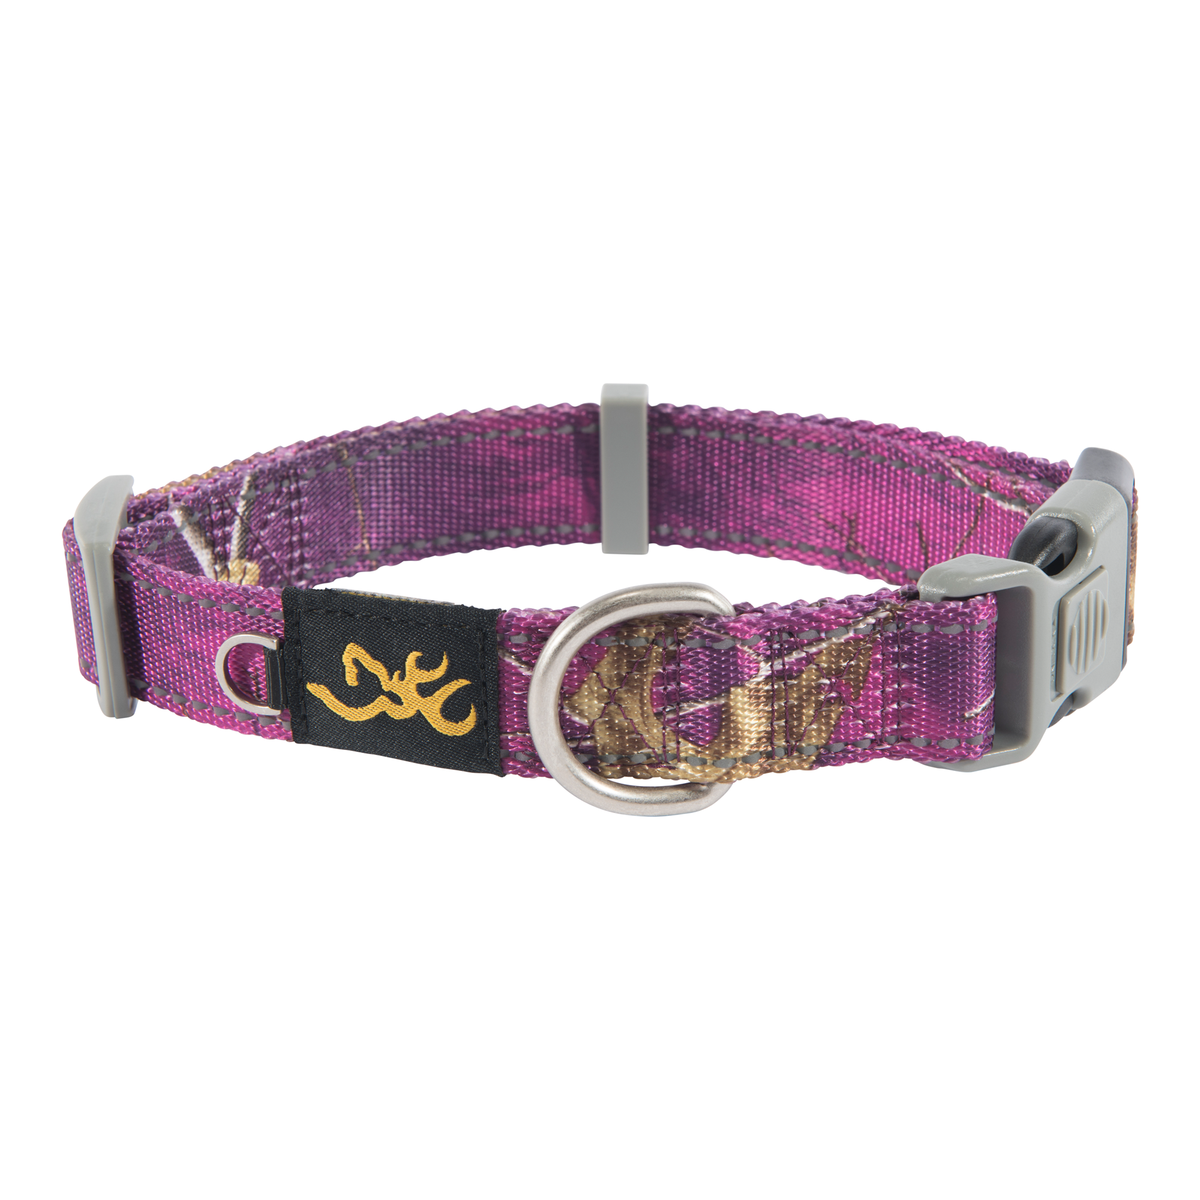 CLASSIC WEBBING CAMO COLLAR. LARGE, REALTREE EXTRA/PURPLE 1 X 18-28 IN